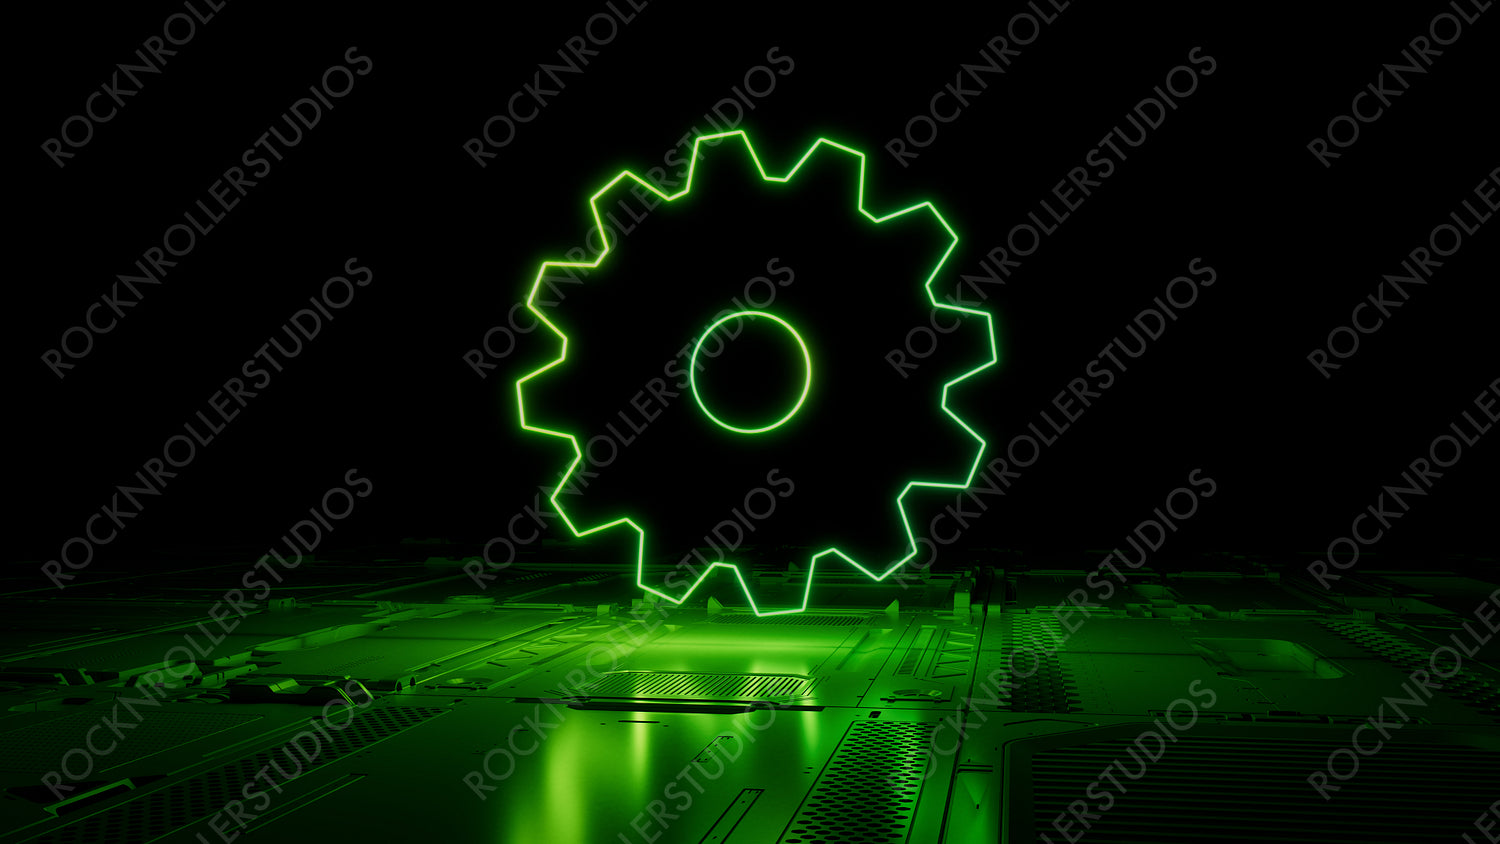 Green Configure Technology Concept with cog symbol as a neon light. Vibrant colored icon, on a black background with high tech floor. 3D Render